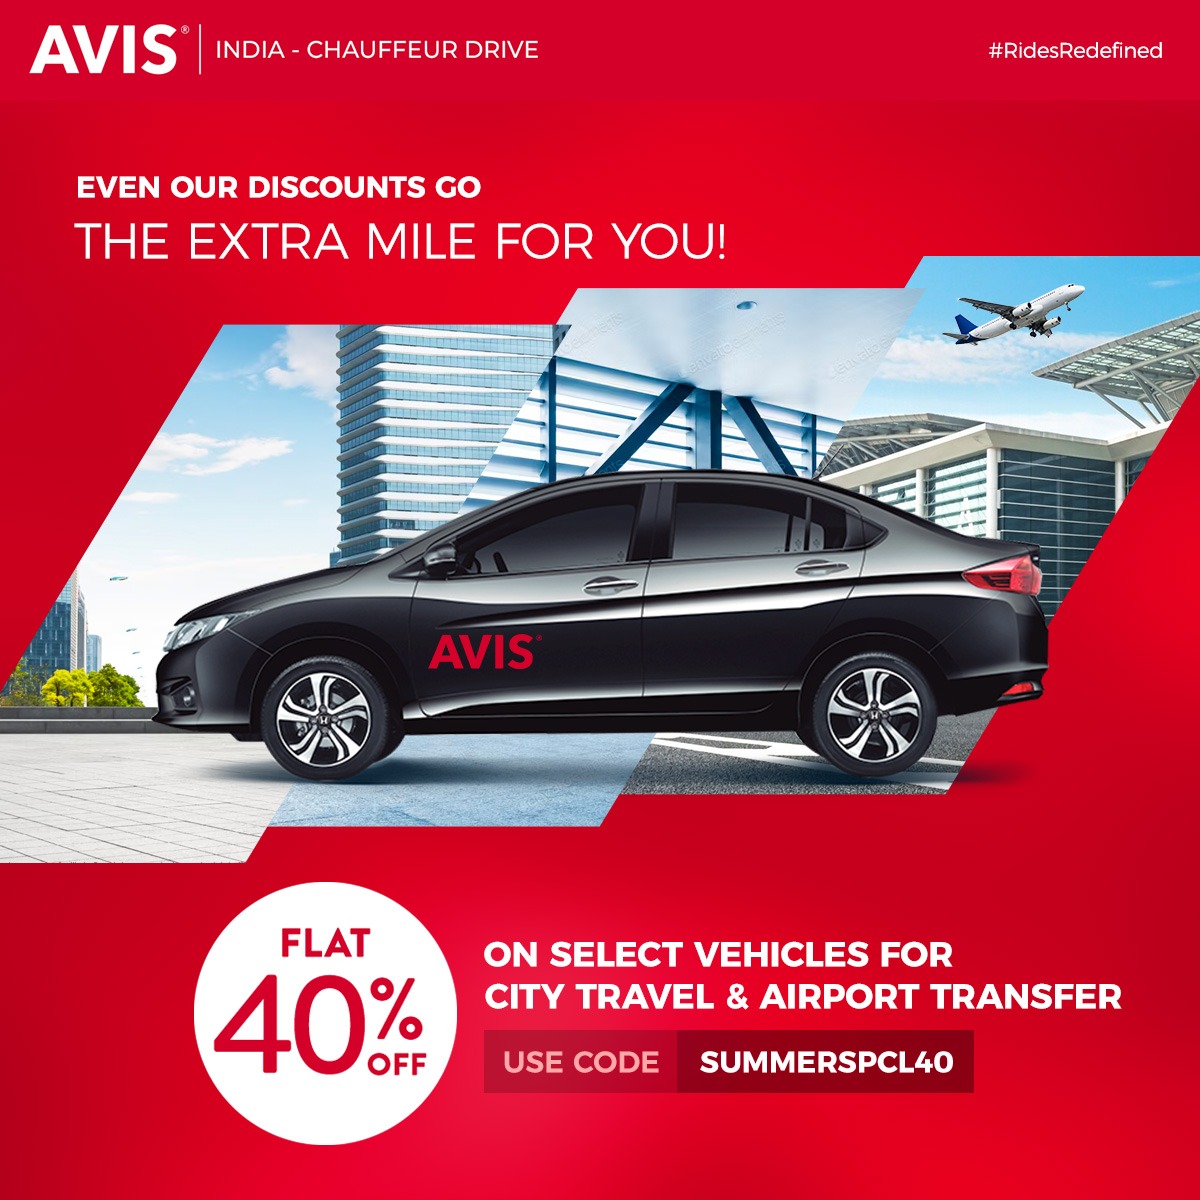 One more reason to experience riding in style. Get a Flat 40% discount on select vehicles for City Travel and Airport Transfer.

Book your ride: bit.ly/3UnjDn0

#RidesRedefined #AvisIndia #Avis #Luxury #CarRental #AvisChauffeurDrive #ChauffeurDrive #Comfort #ExtraMile